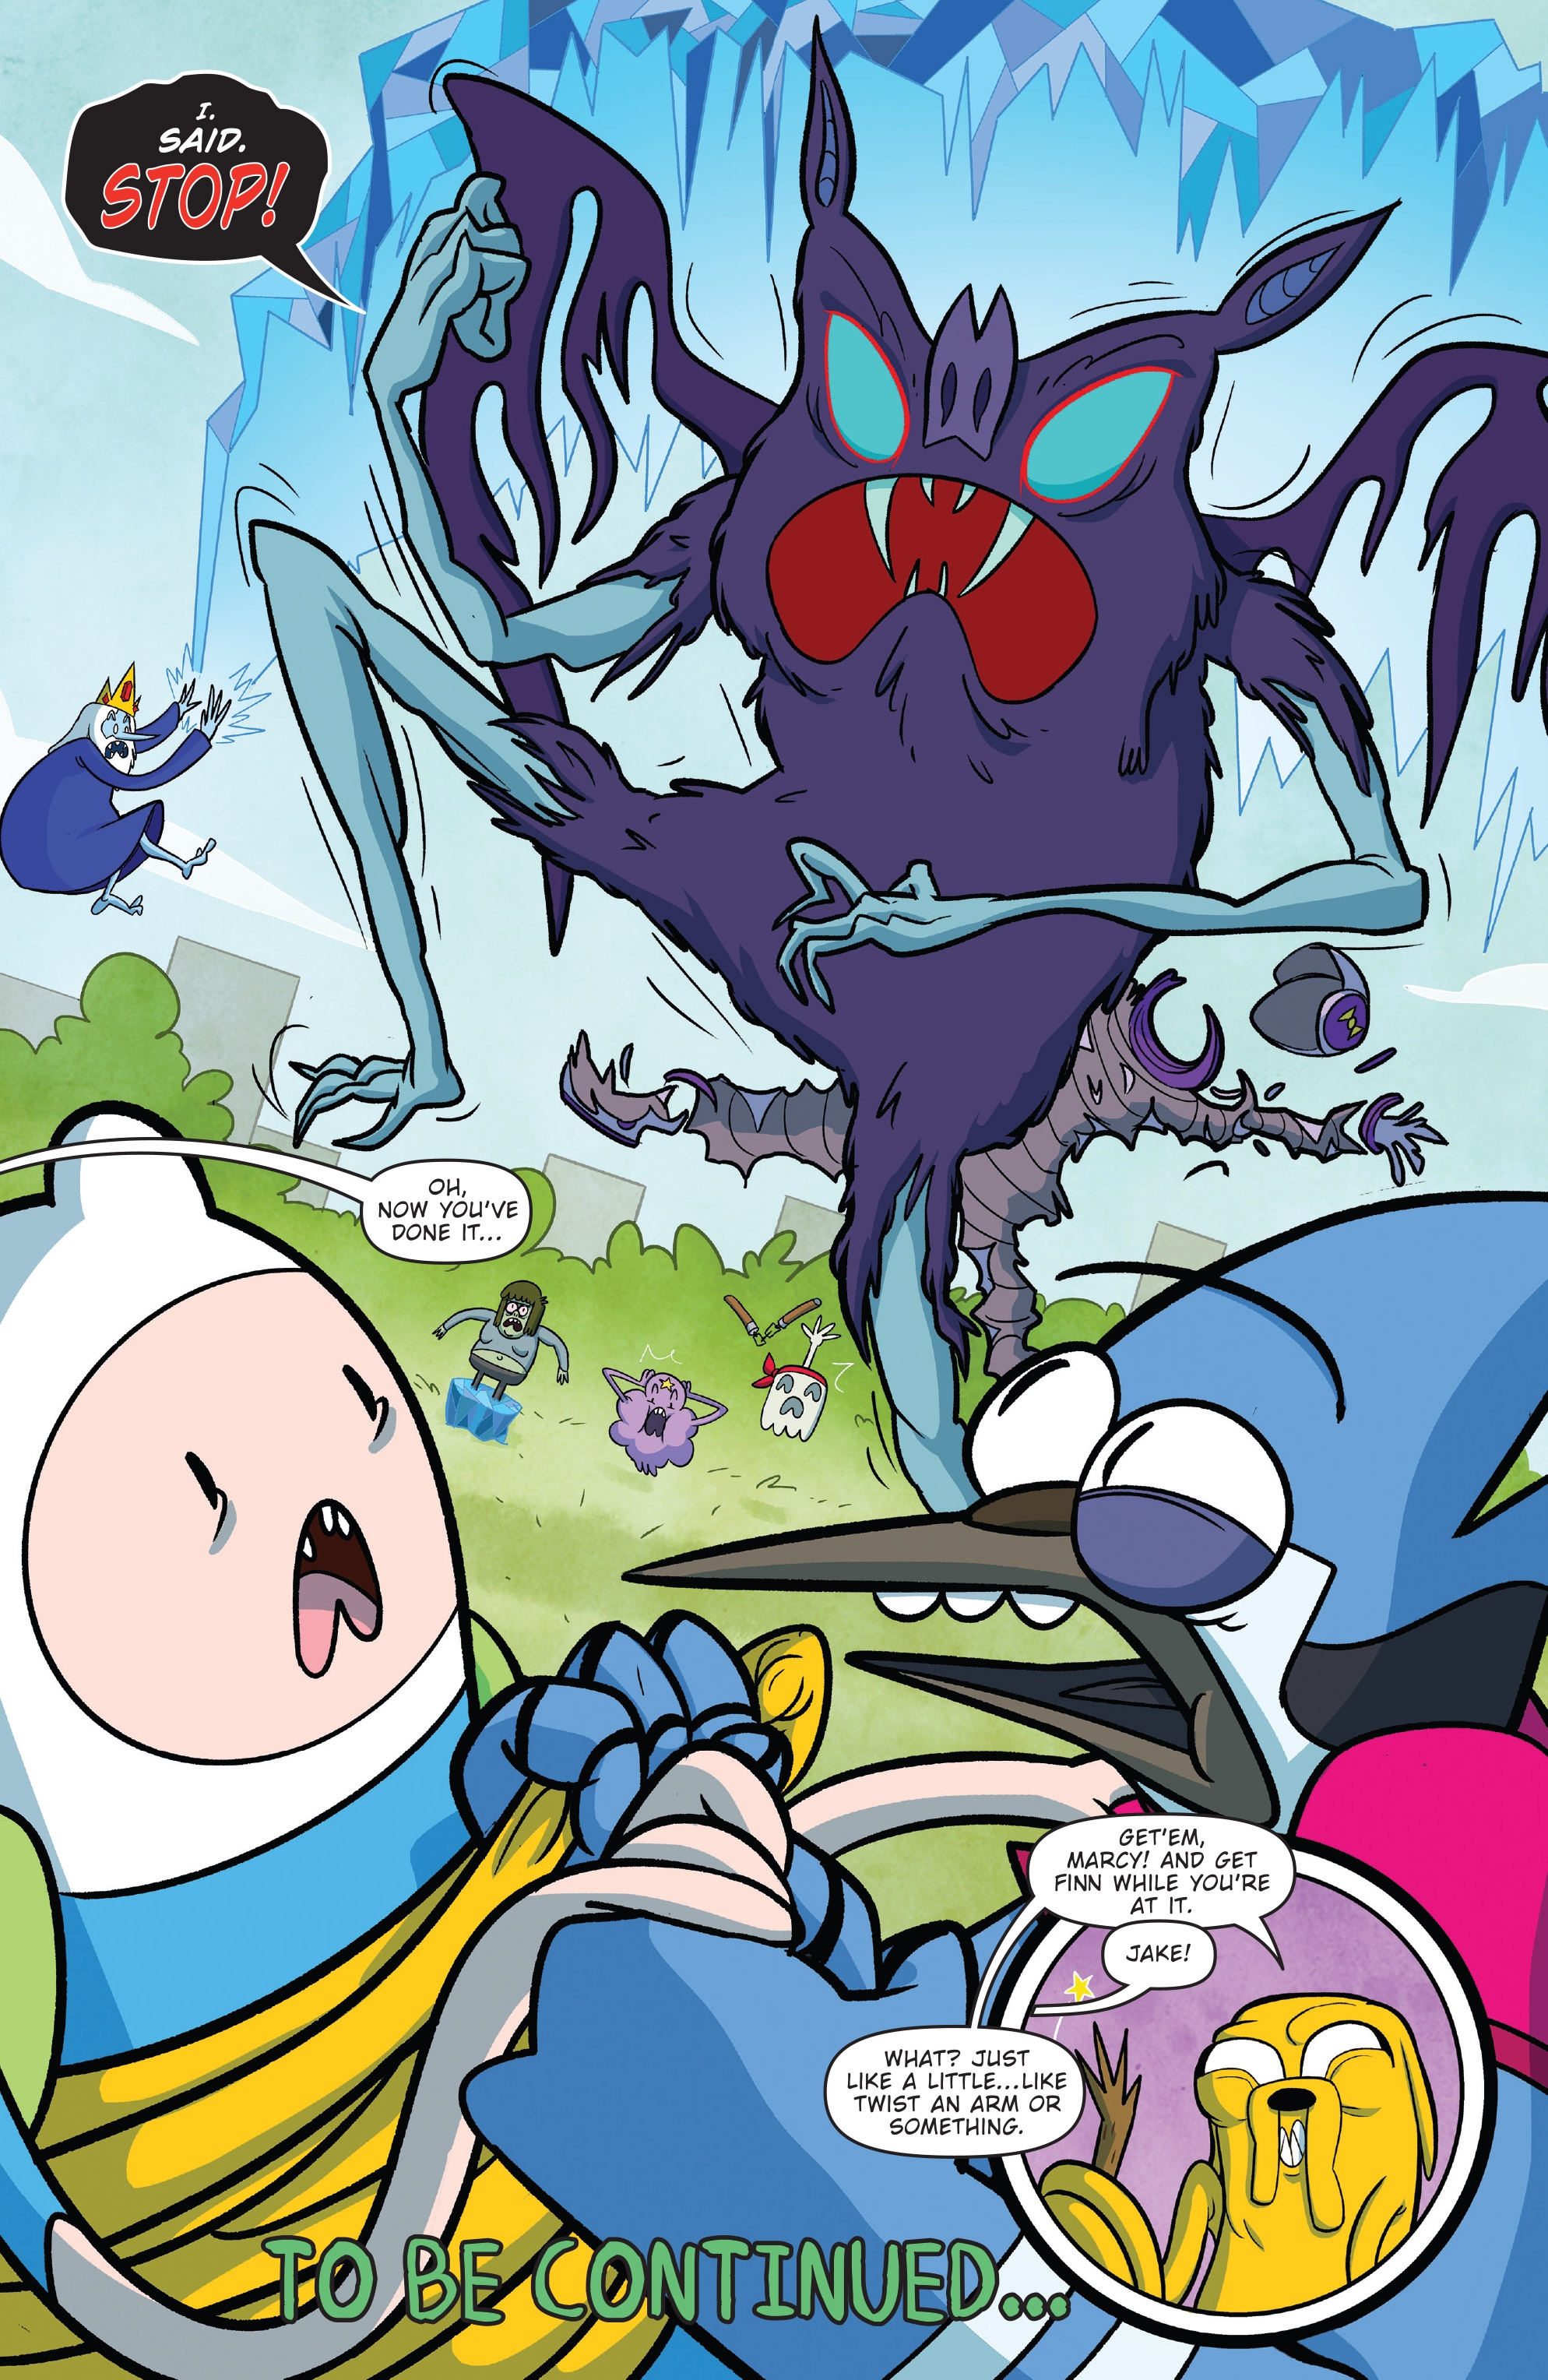 Adventure Time and Regular Show Crossover Comic Announced